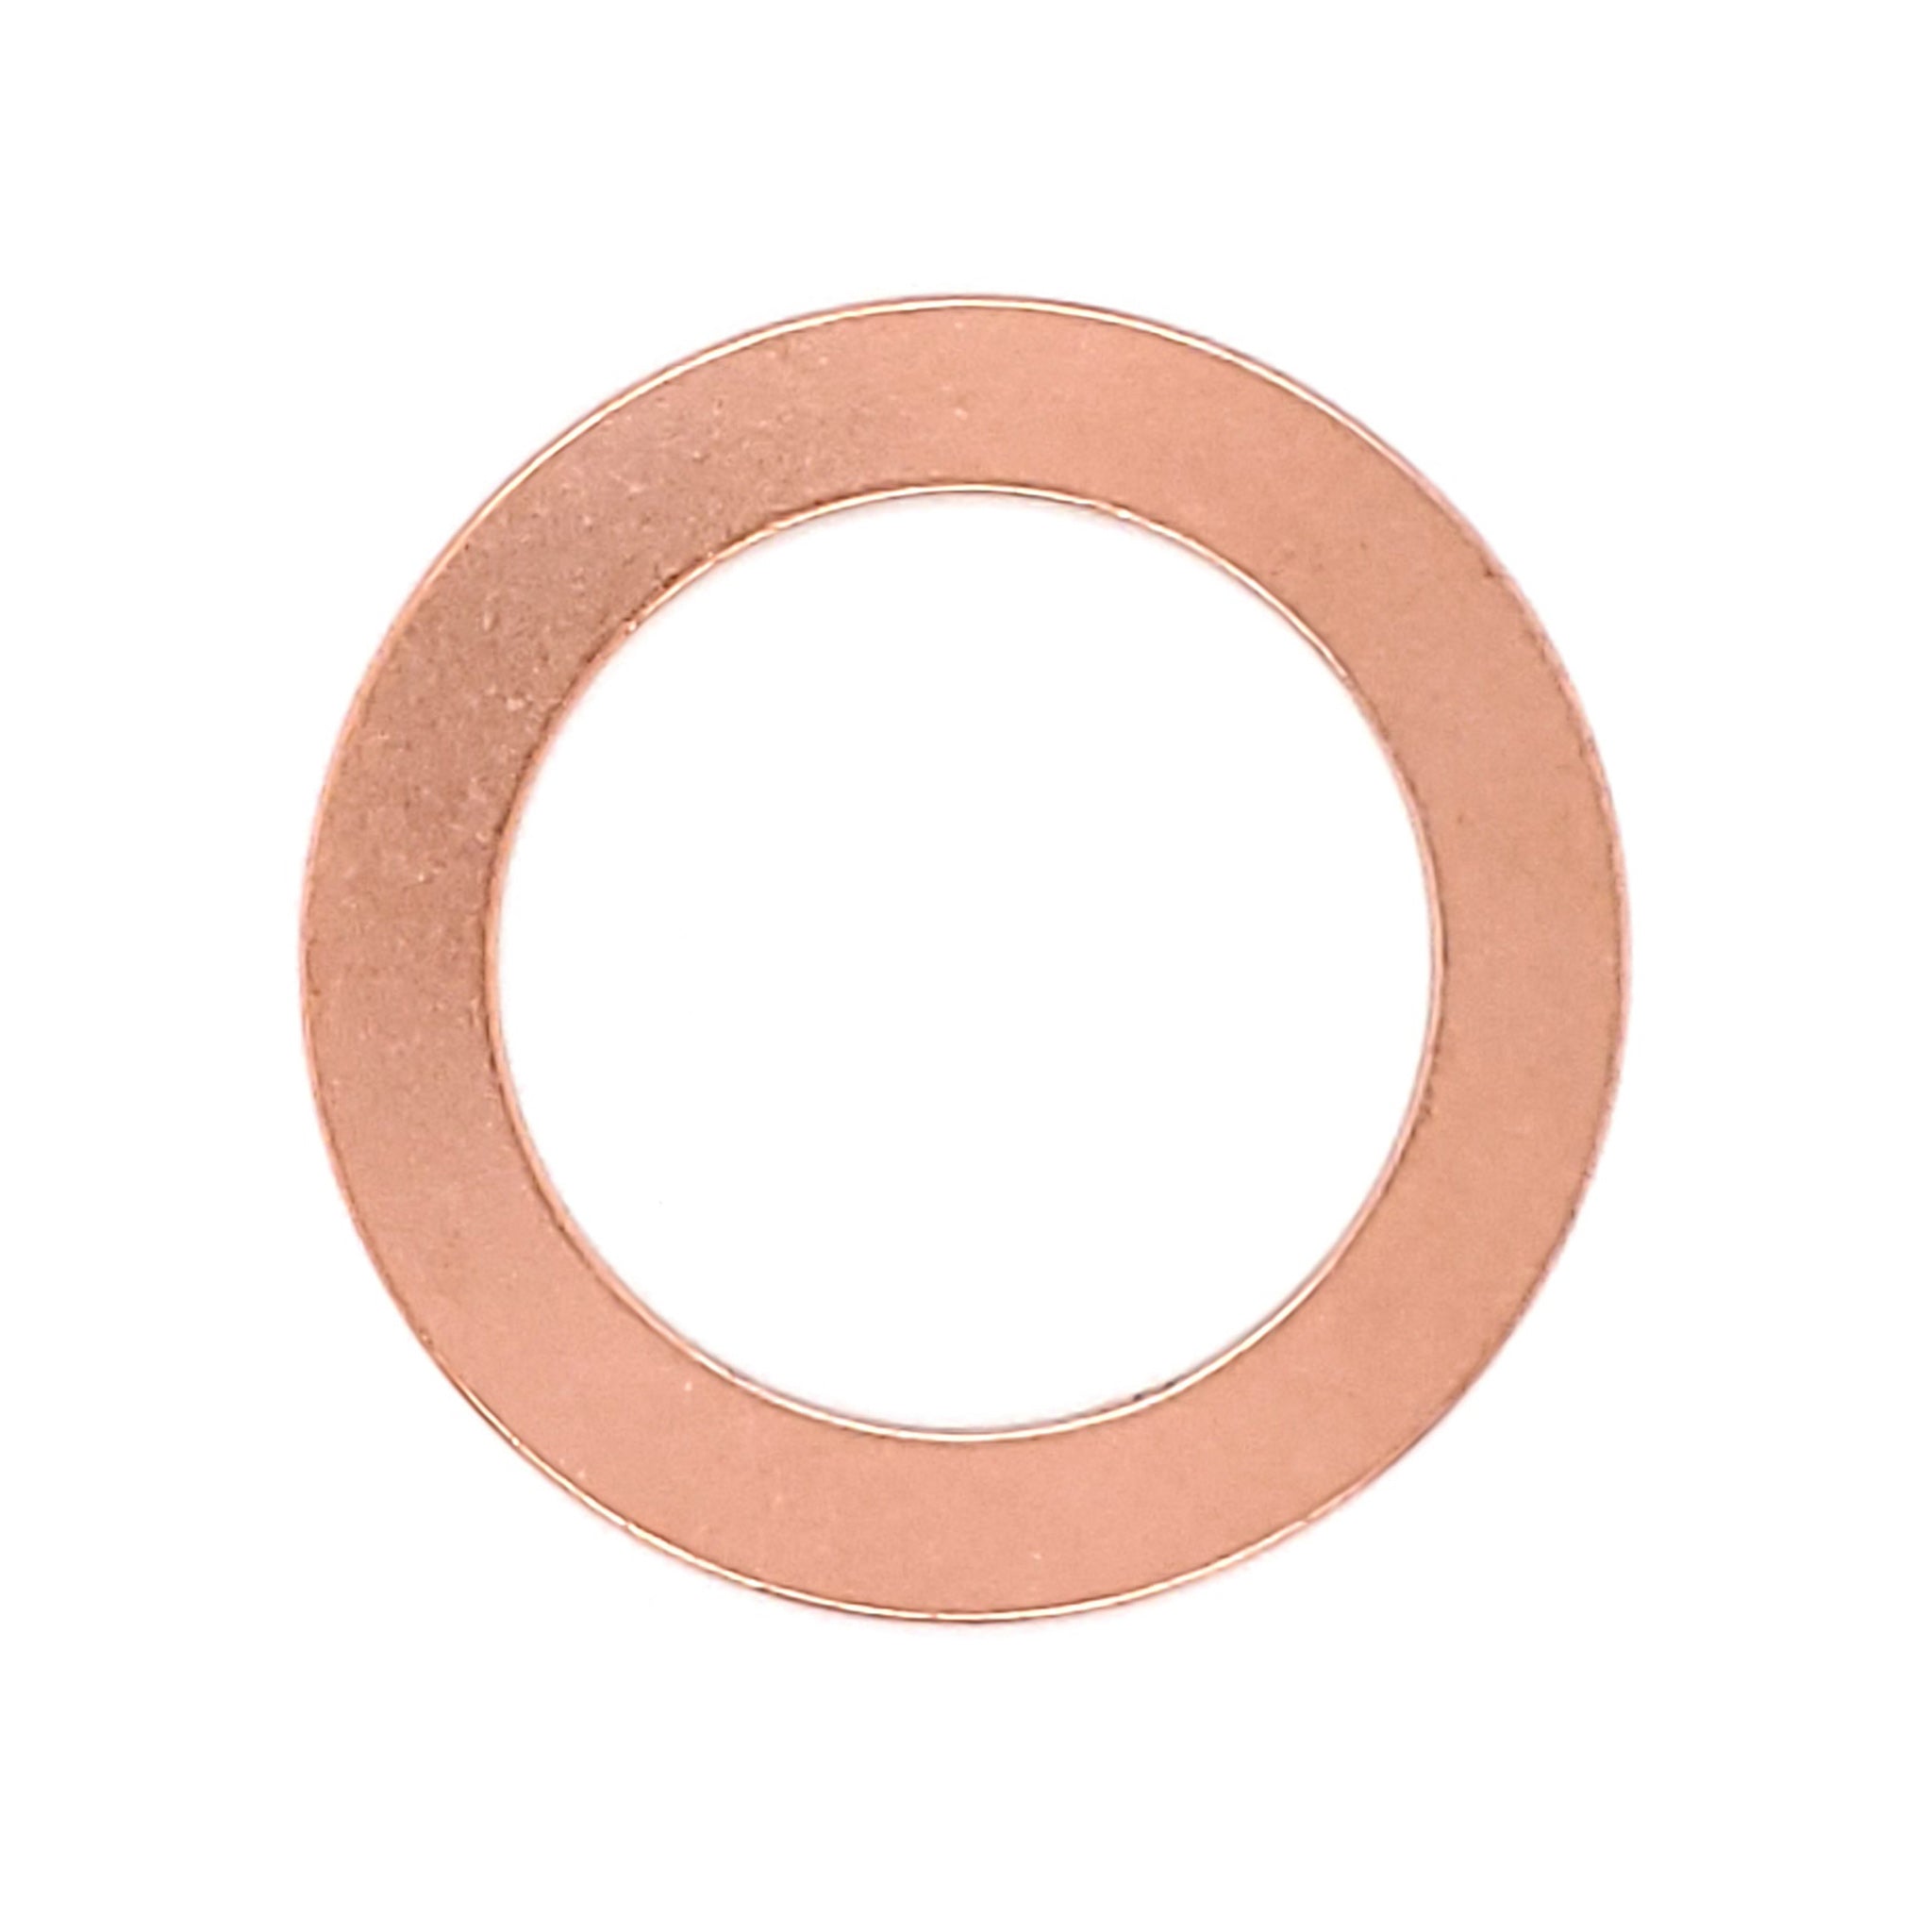 Copper blank washer pendant- stainless copper brass jewelry wholesale copper brass bronze jewelry difference between copper brass jewelry findings copper brass jewelry making copper jewelry brass brush copper vs brass jewelry